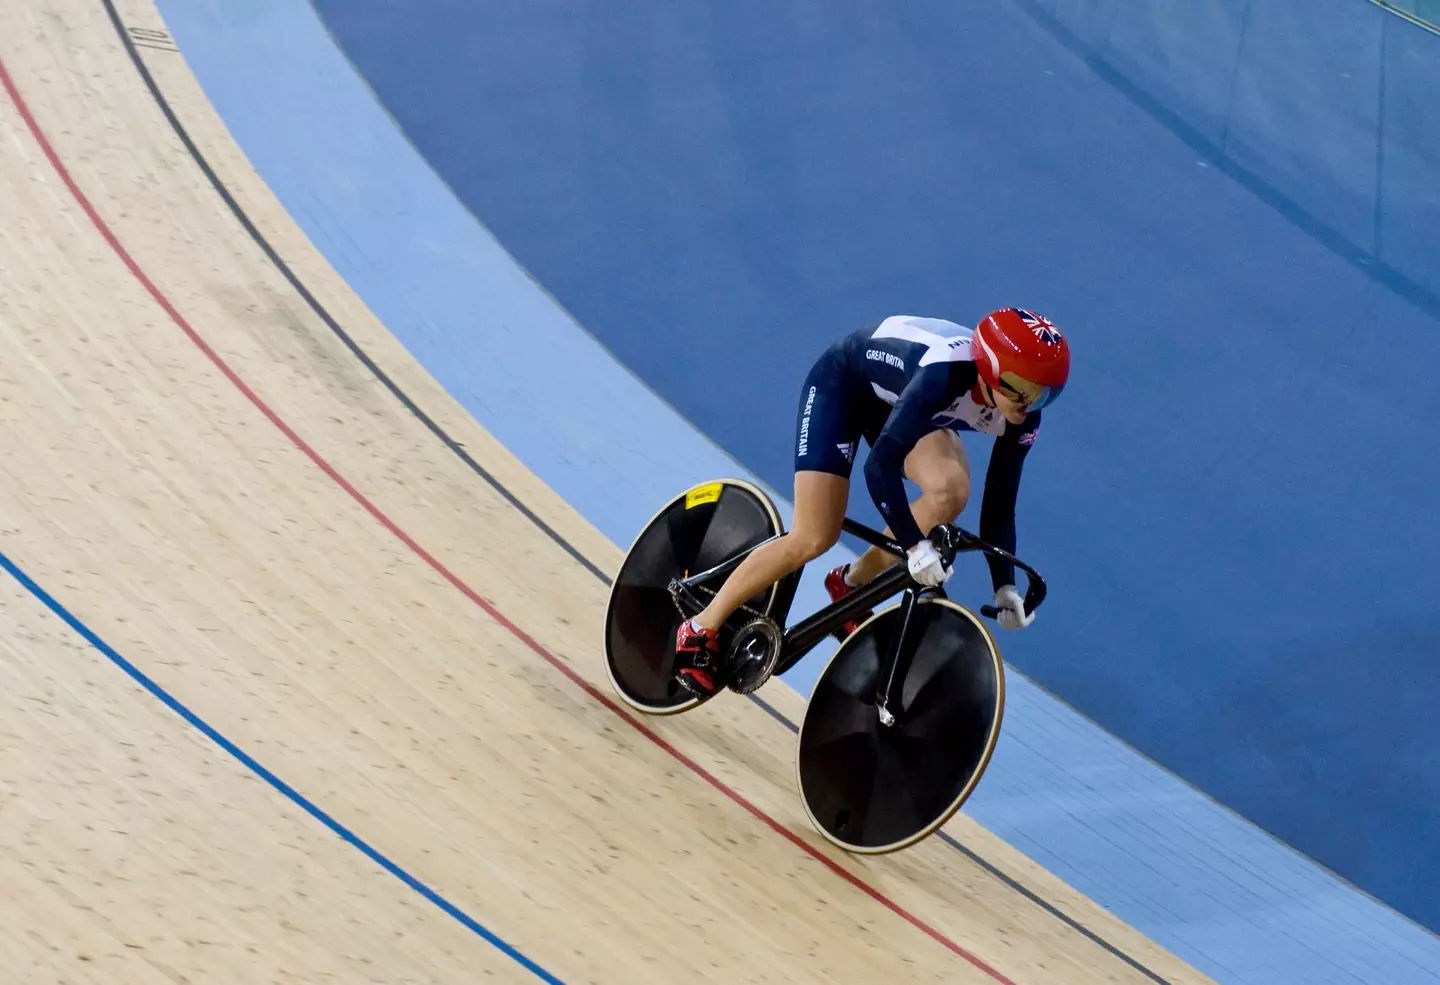 Victoria Pendleton competed at the London 2012 Olympics.